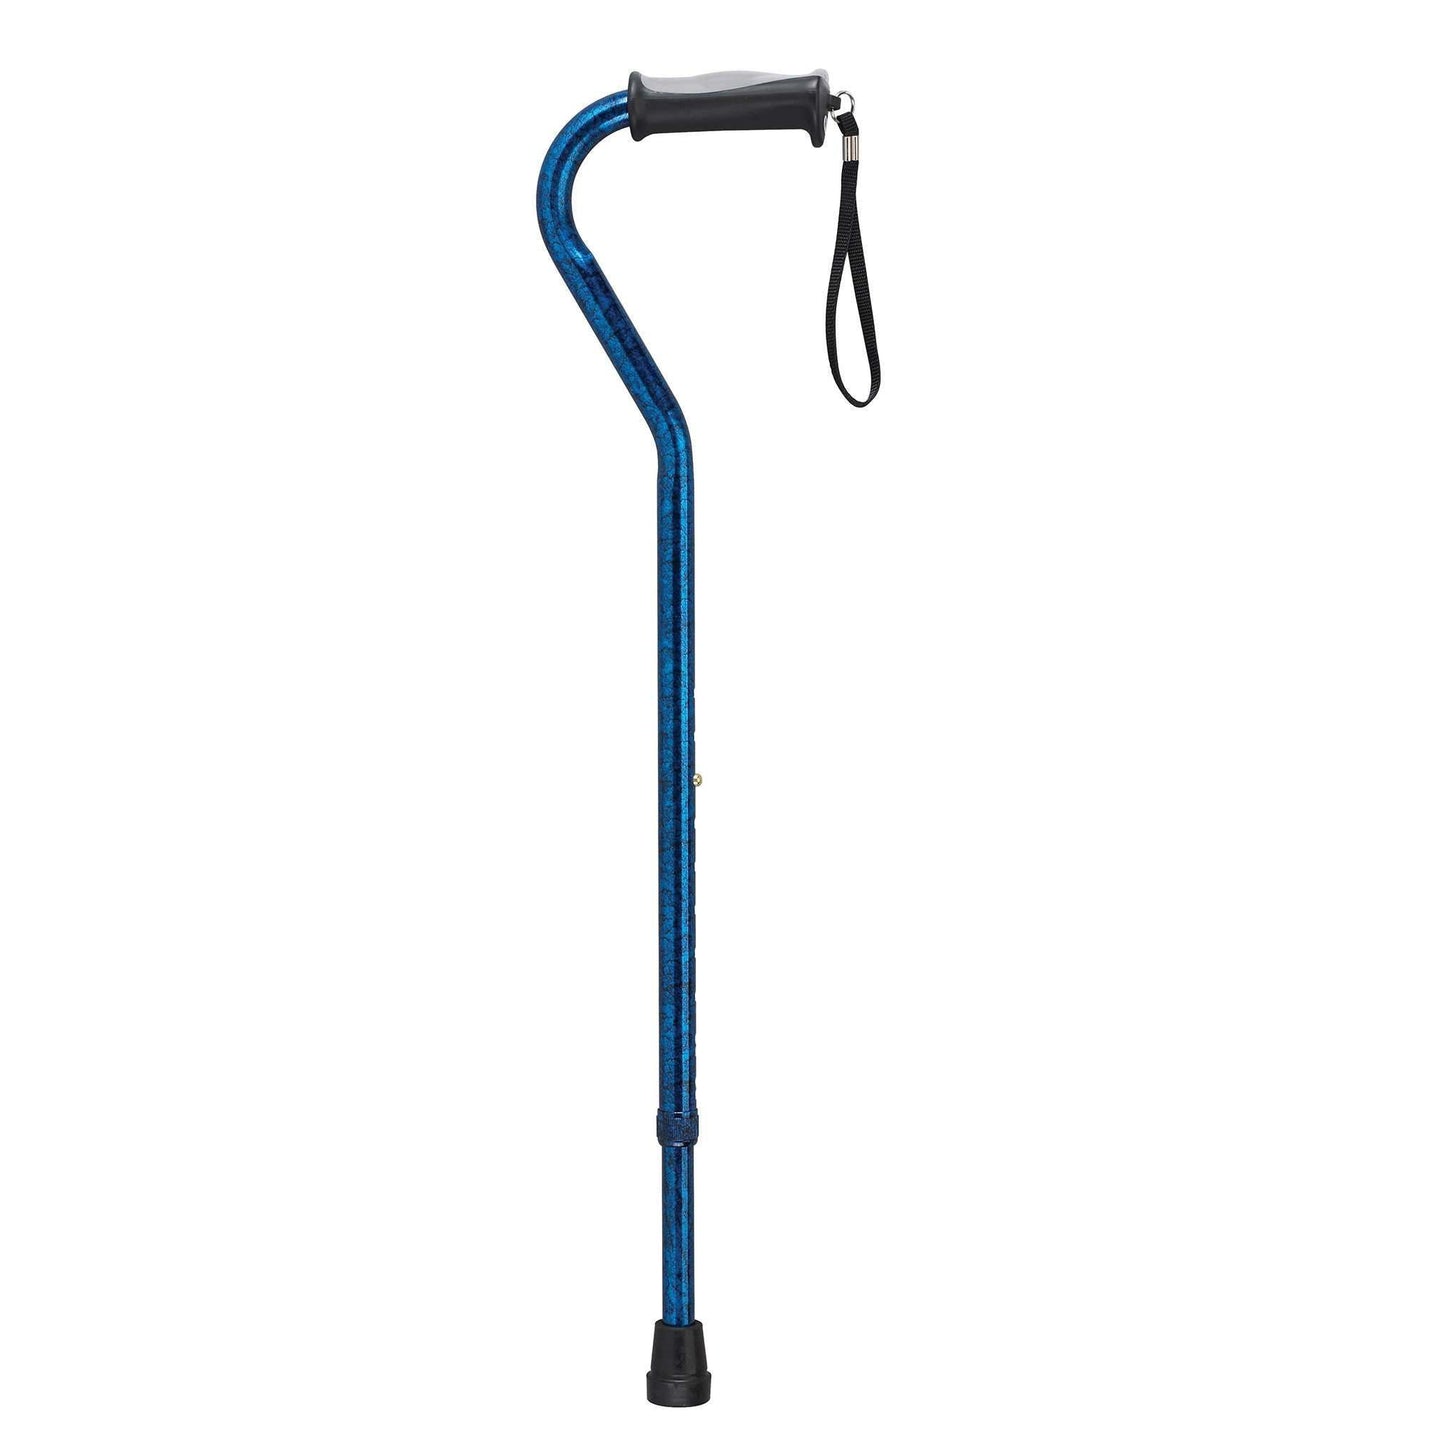 Drive rtl10372bc Adjustable Height Offset Handle Cane with Gel Hand Grip, Blue Crackle